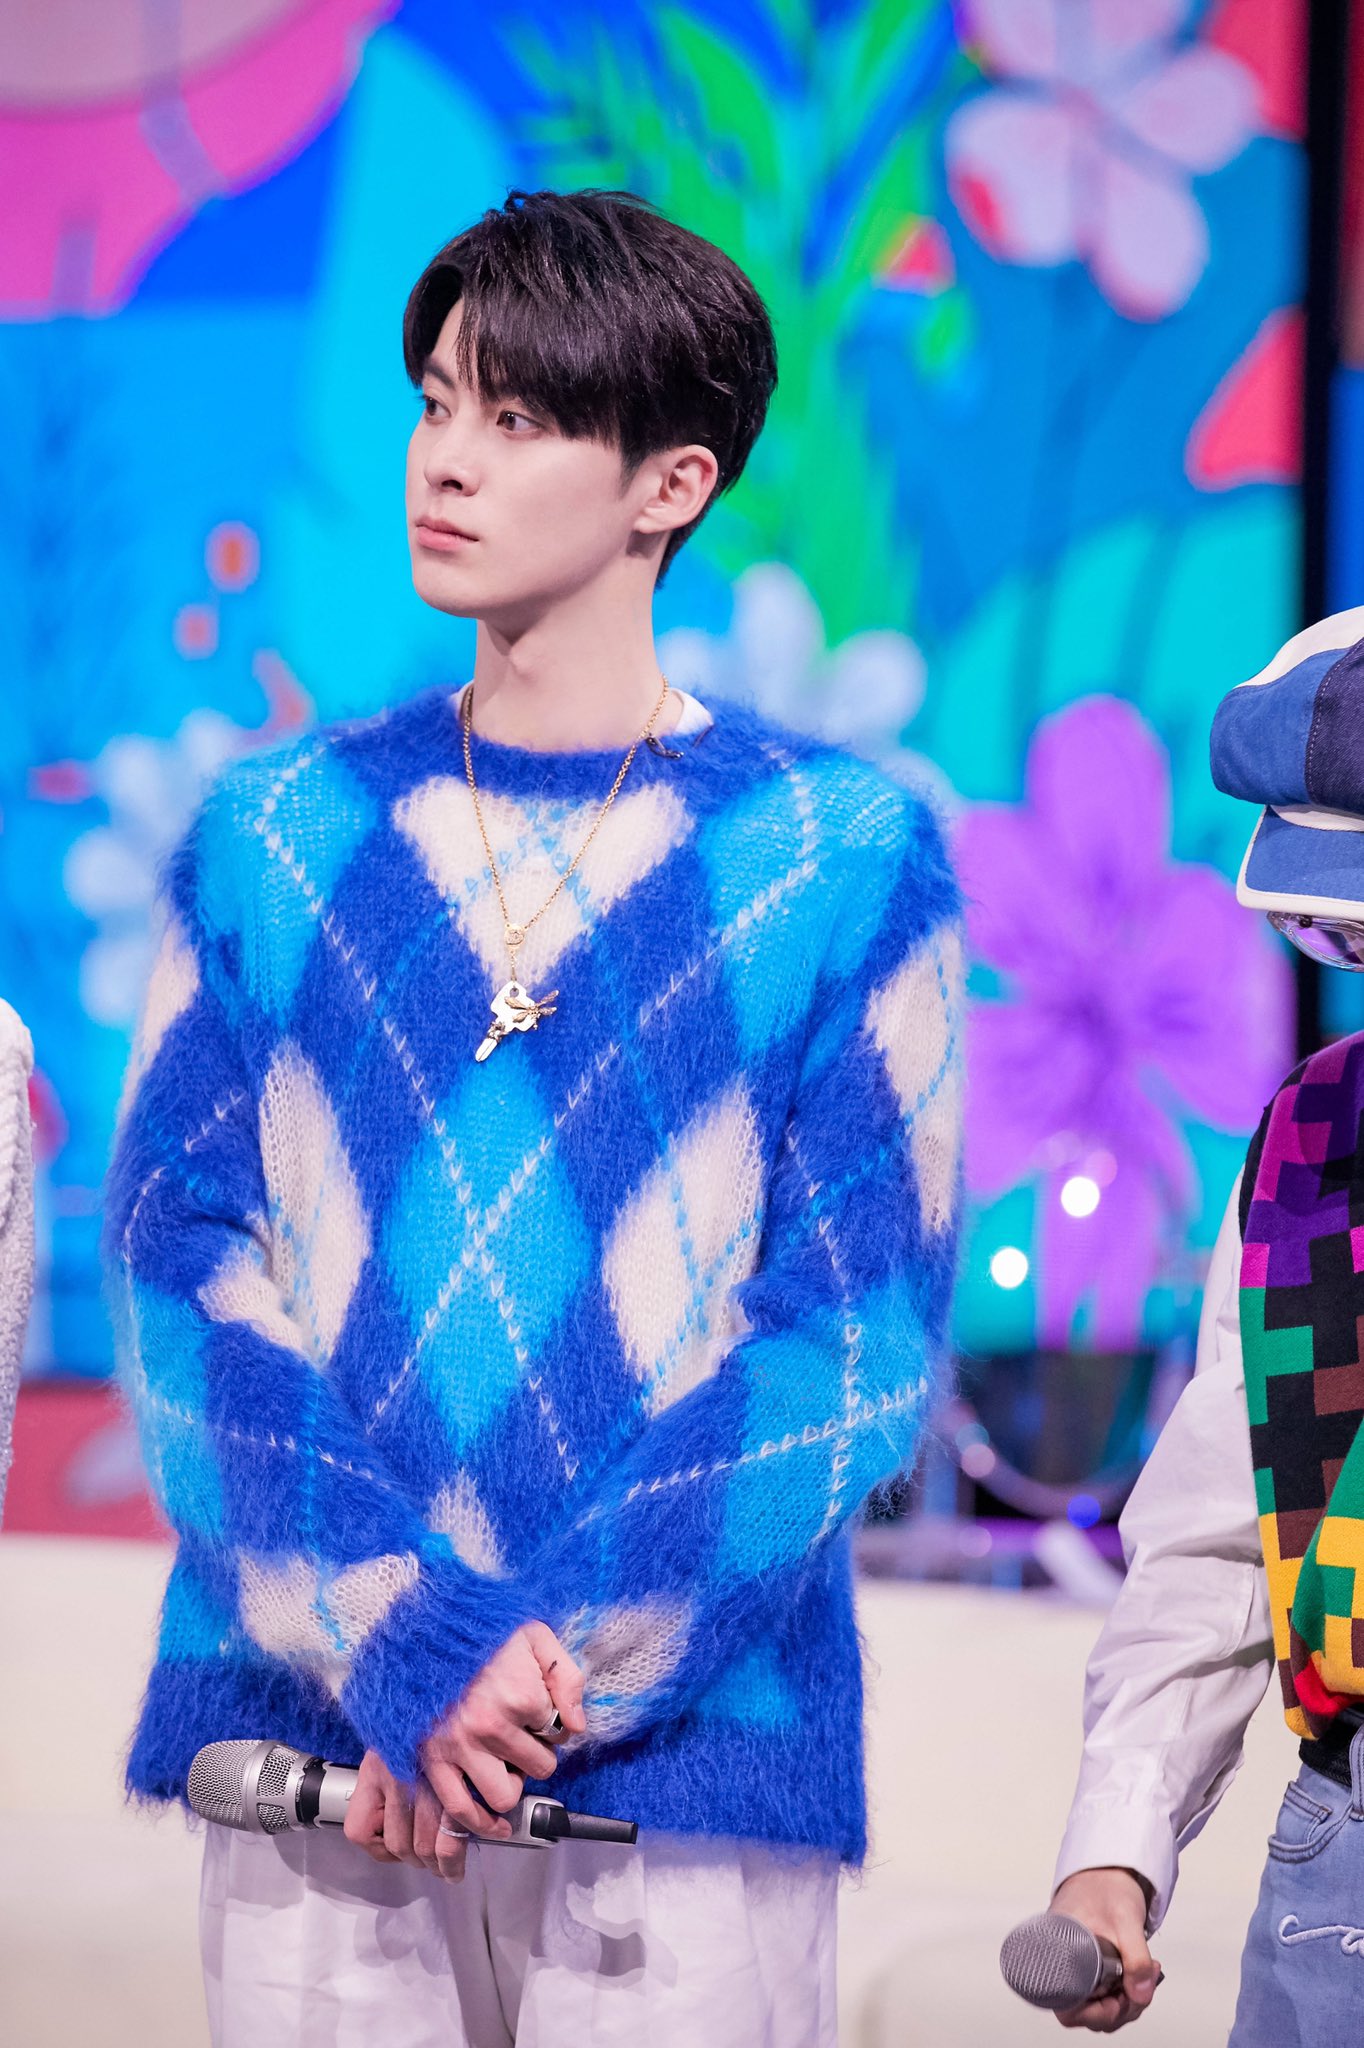 dylan wang archive 📂 on X: [📸] 19.03.2022  Dylan Wang Diary Weibo  Update with stills of hello saturday ✨ [#DYLANWANG #王鹤棣 #WANGHEDI]   / X